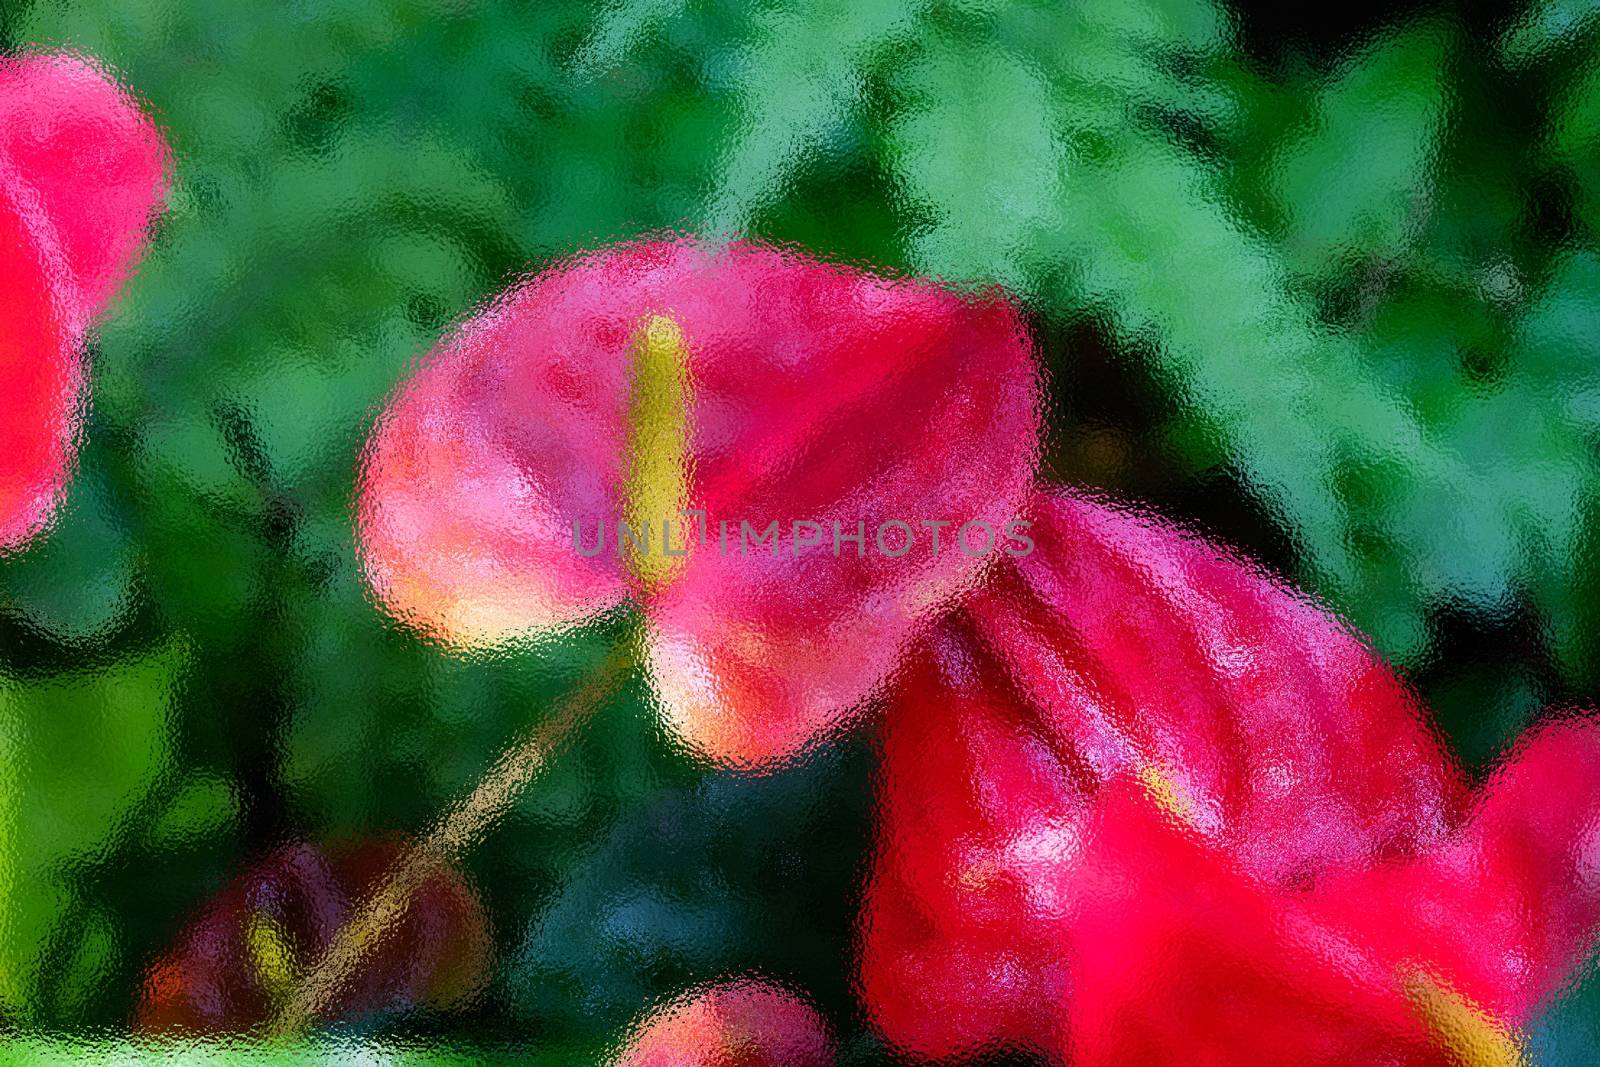 The Abstract frosted glass image on Anthurium is a red heart-shaped flower. Dark green leaves as a background make the flowers stand out beautifully. Anthuriums have come to symbolize hospitality.